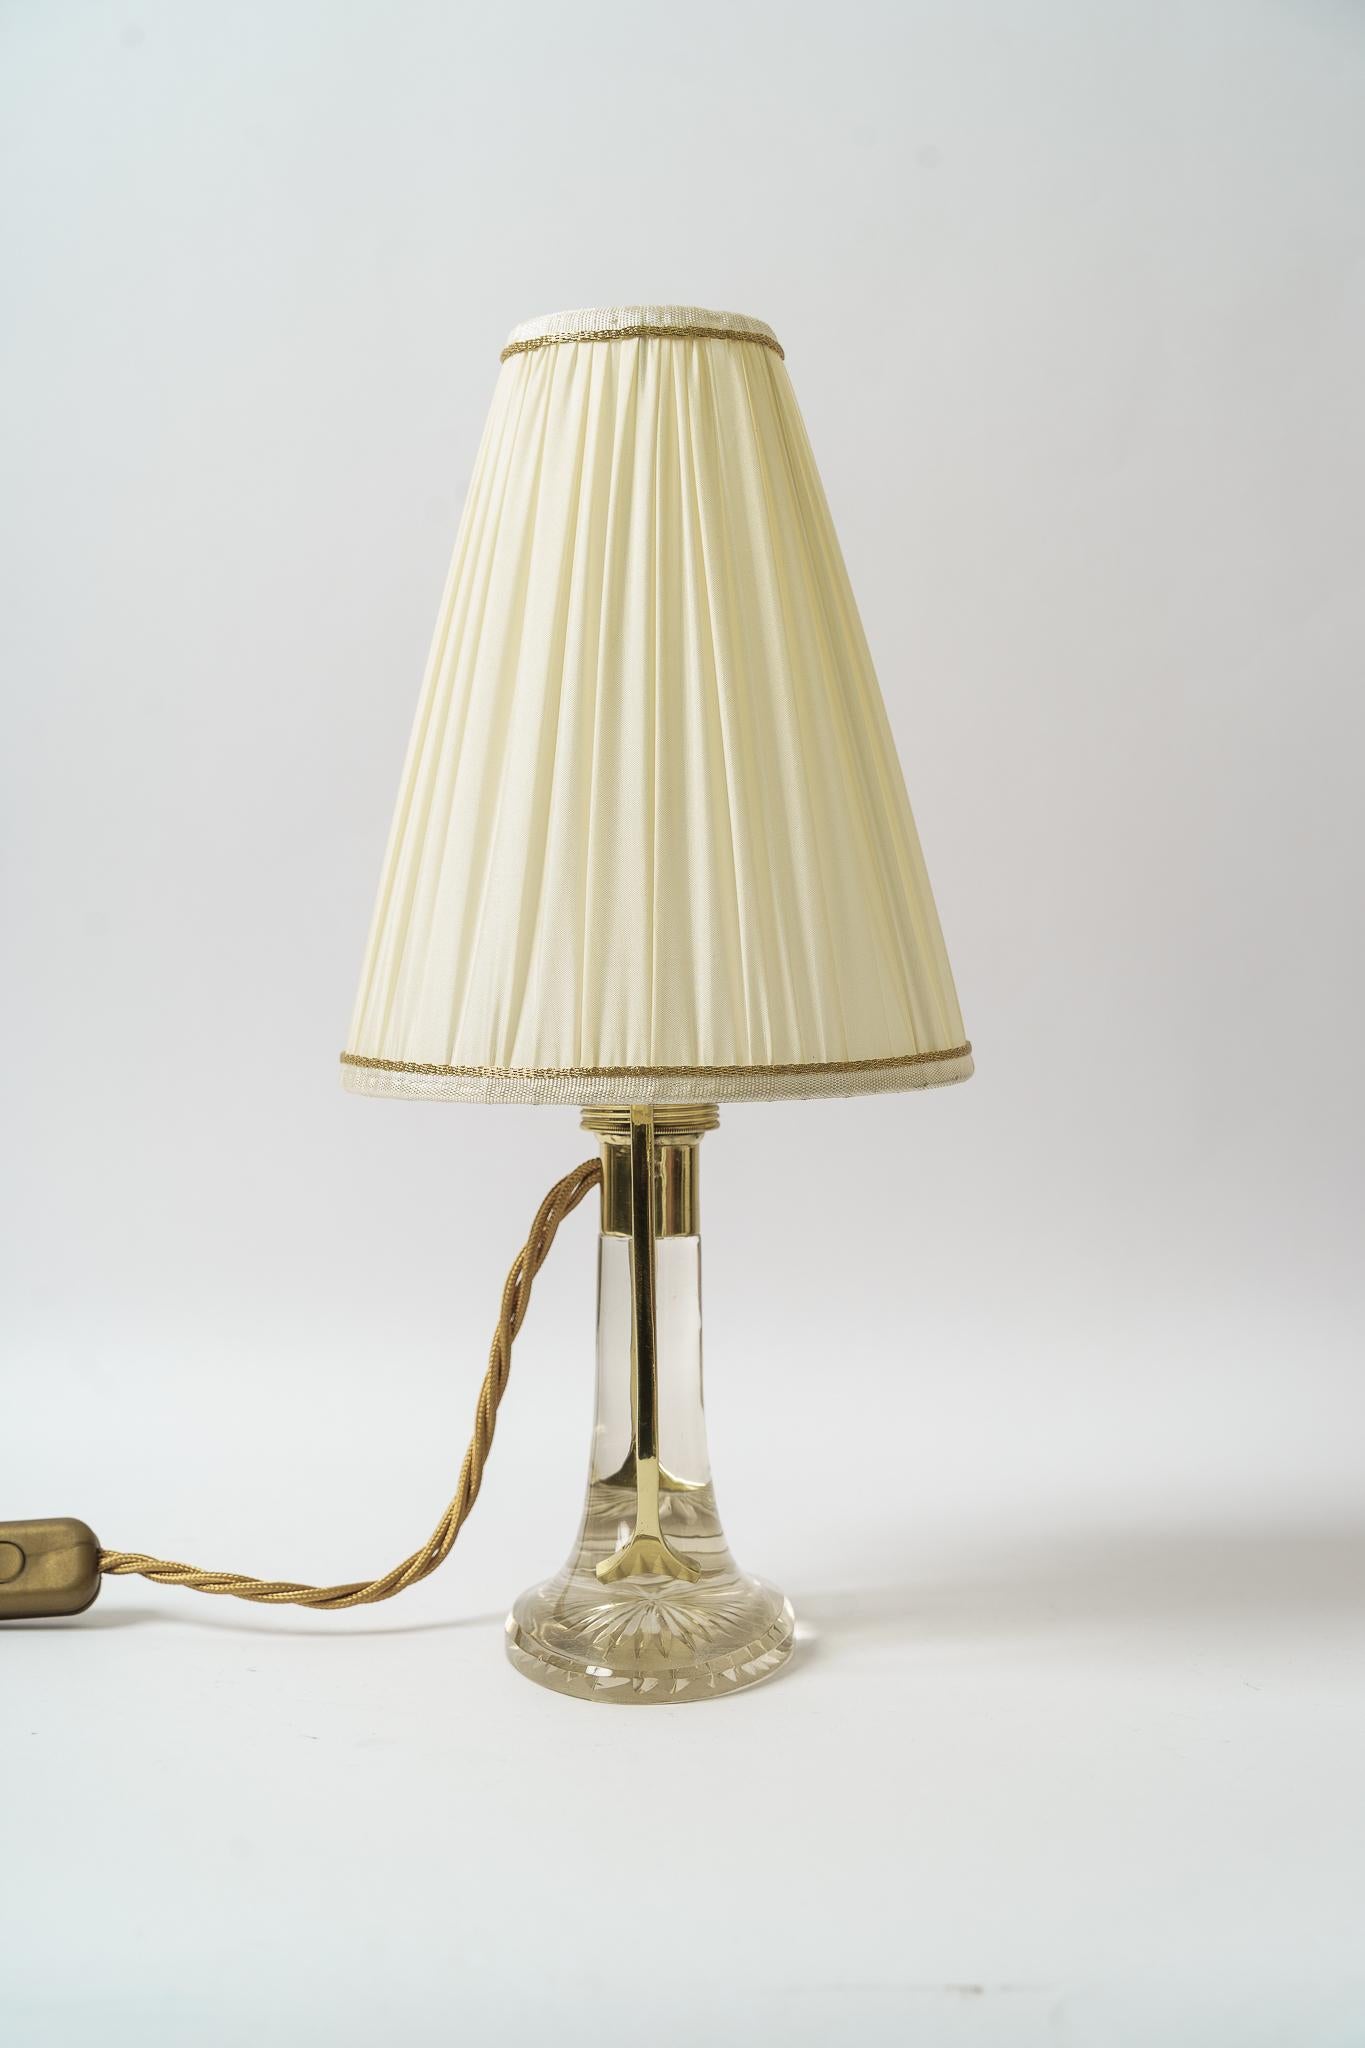 Lacquered Rare Art Deco Glass Table Lamp with Fabric Shade Vienna Around 1920s For Sale